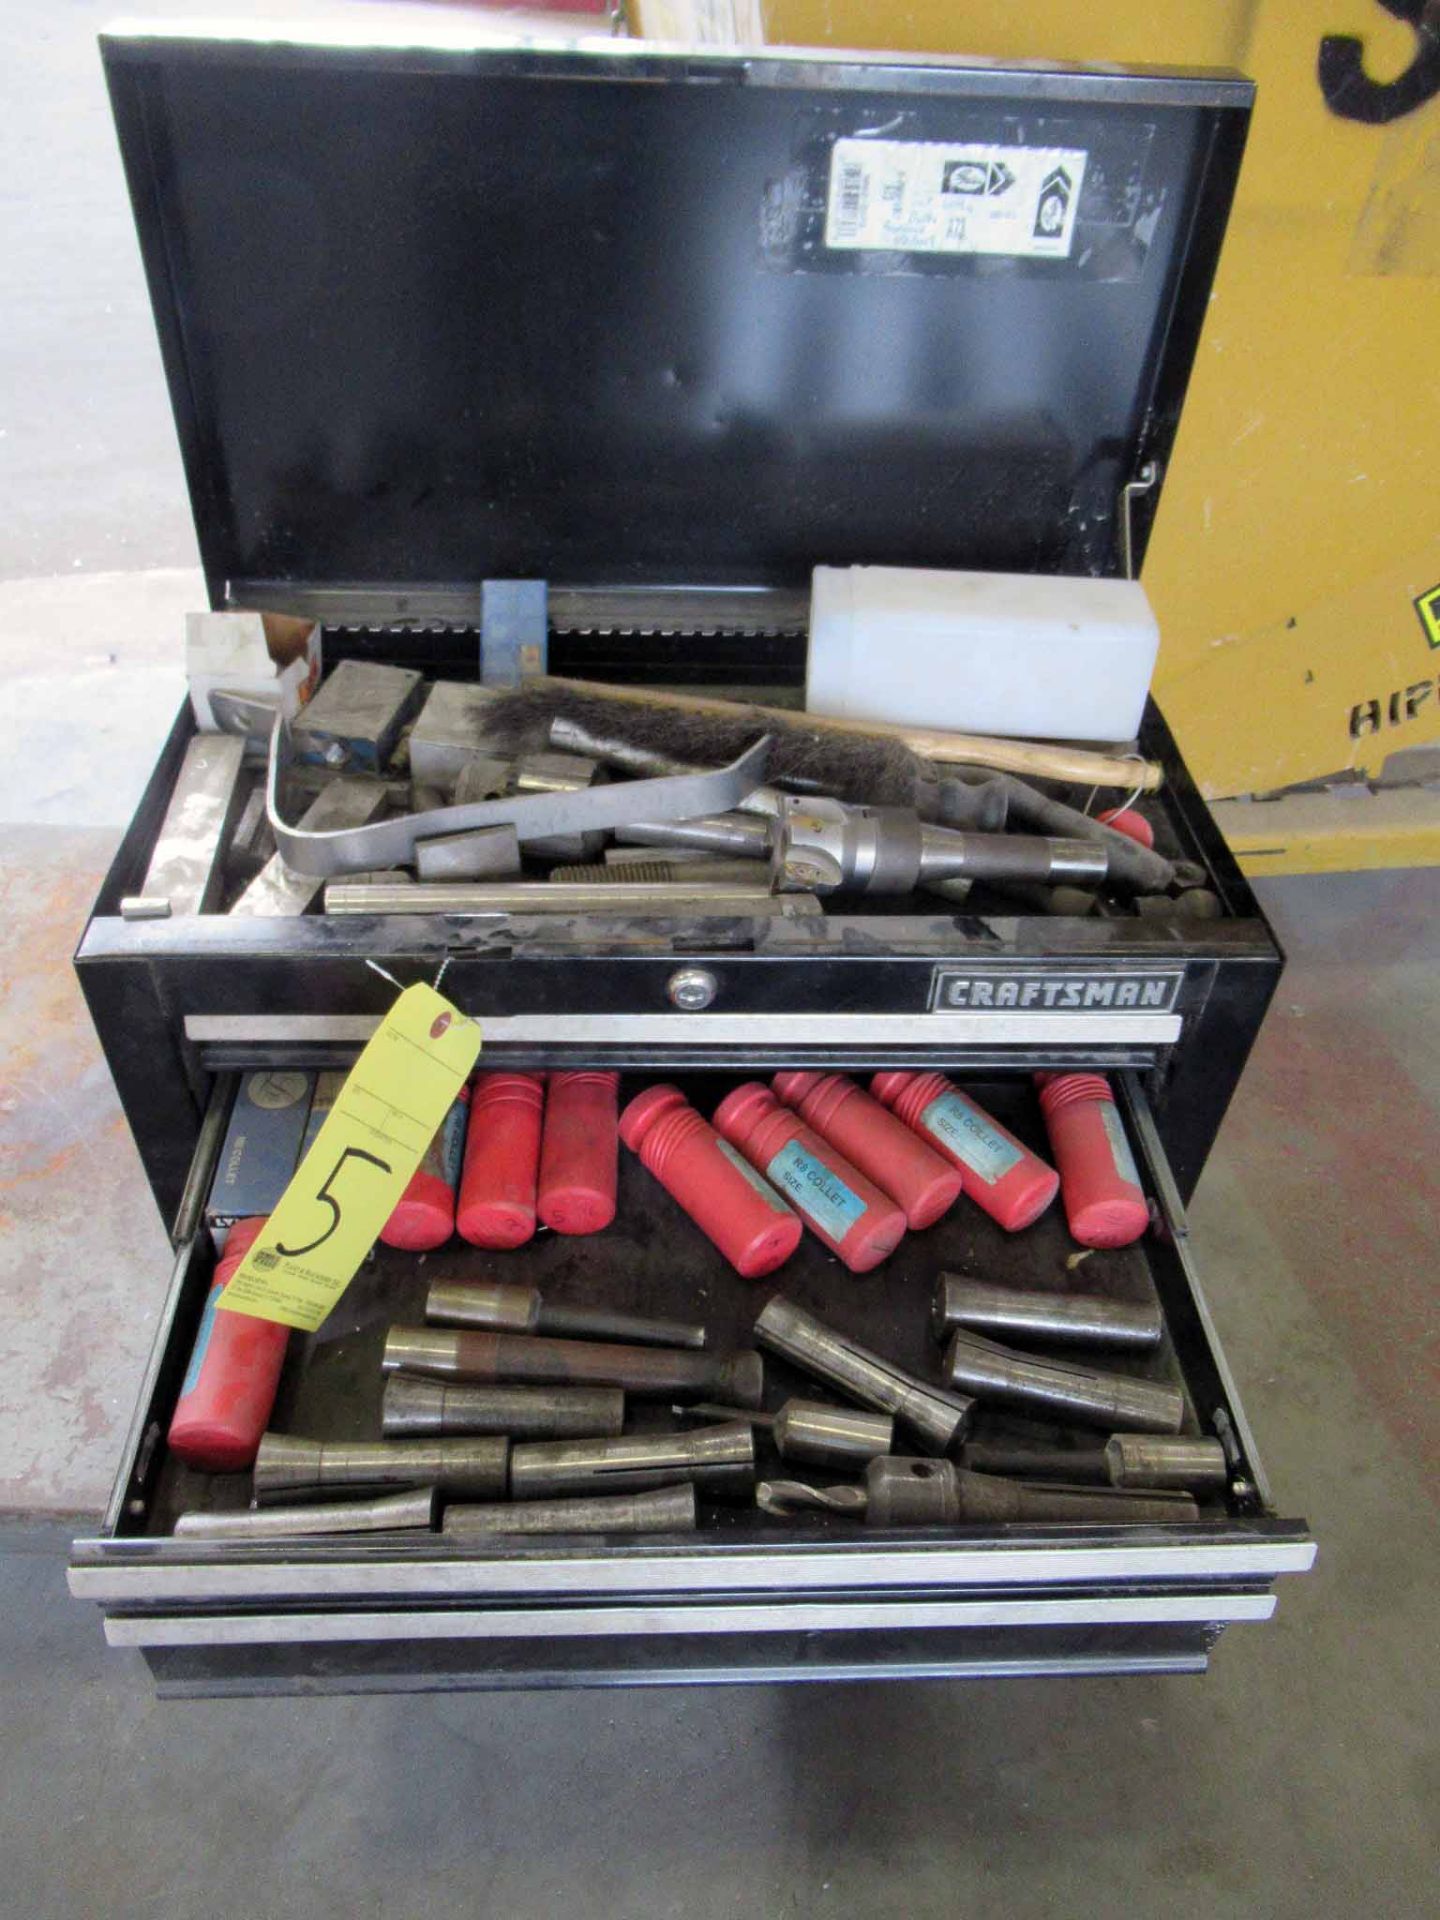 TOOLBOX, CRAFTSMAN, 3-drawer, w/Jacobs chuck, collet set, endmill cutter, inserts, etc. (Location 1: